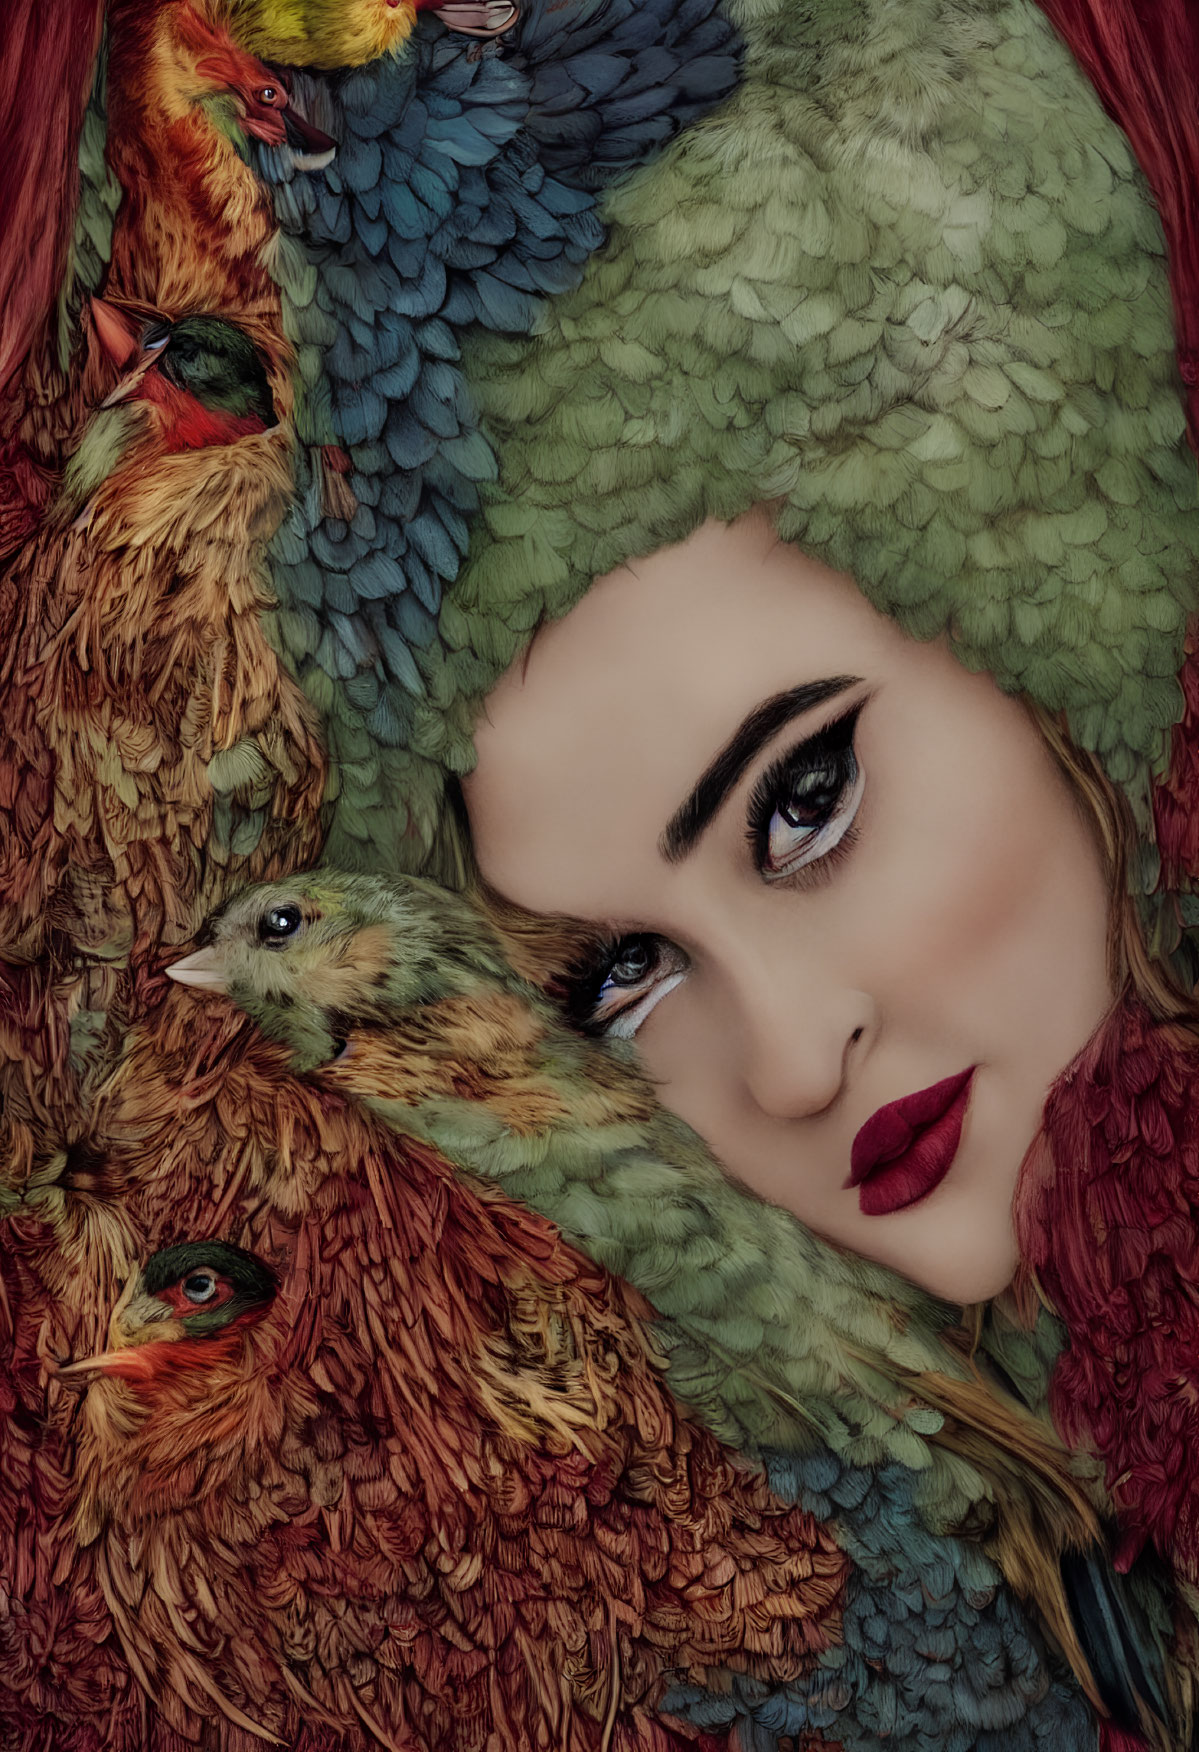 Colorful Feathers Transform into Woman's Face in Surreal Portrait